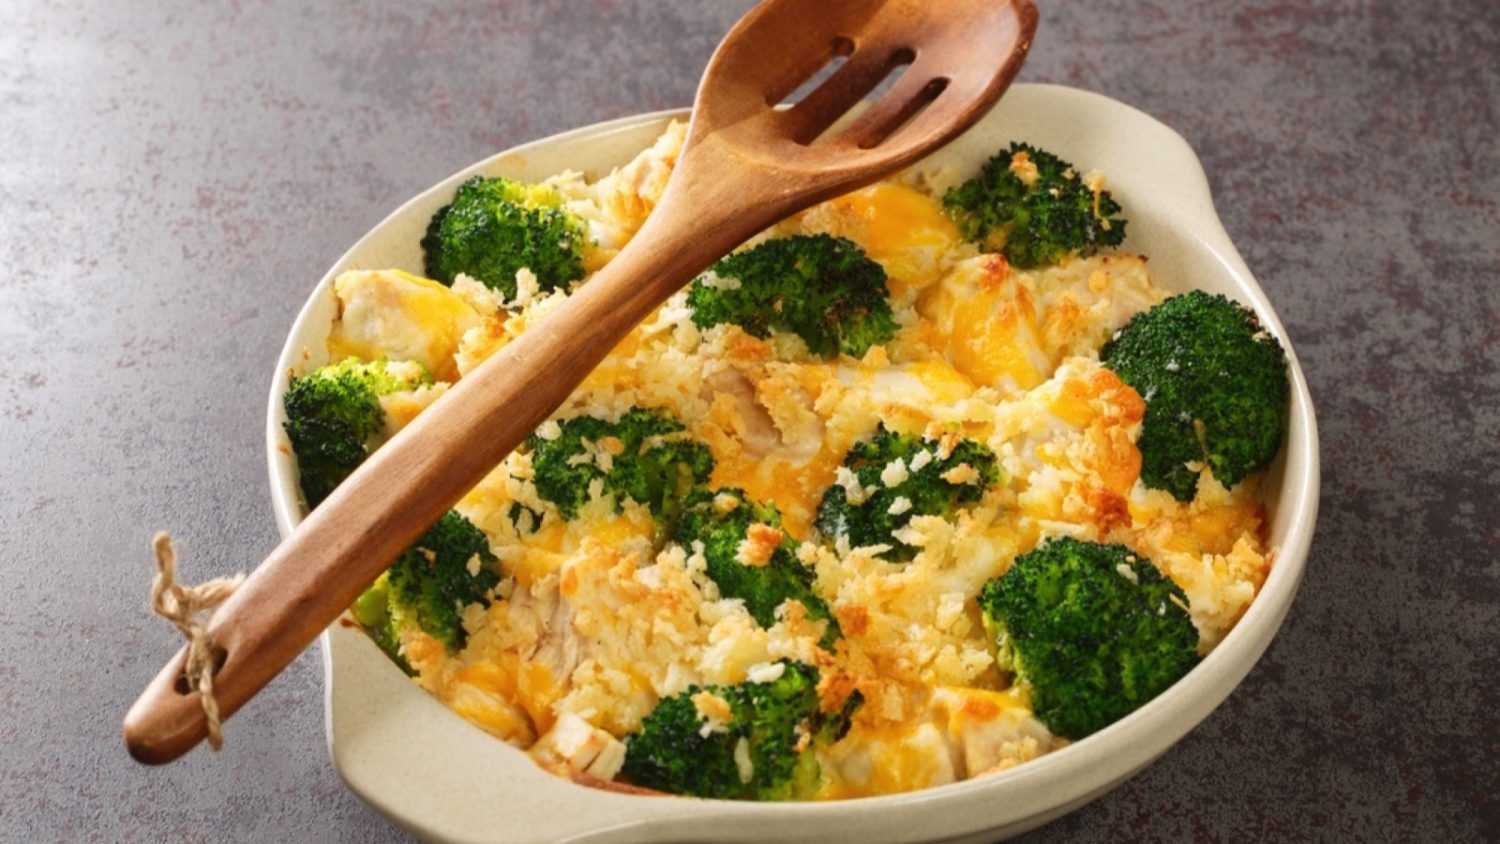 Broccoli Chicken divan is a creamy casserole topped with crispy buttered breadcrumbs close up in the dish on the old table. Horizontal